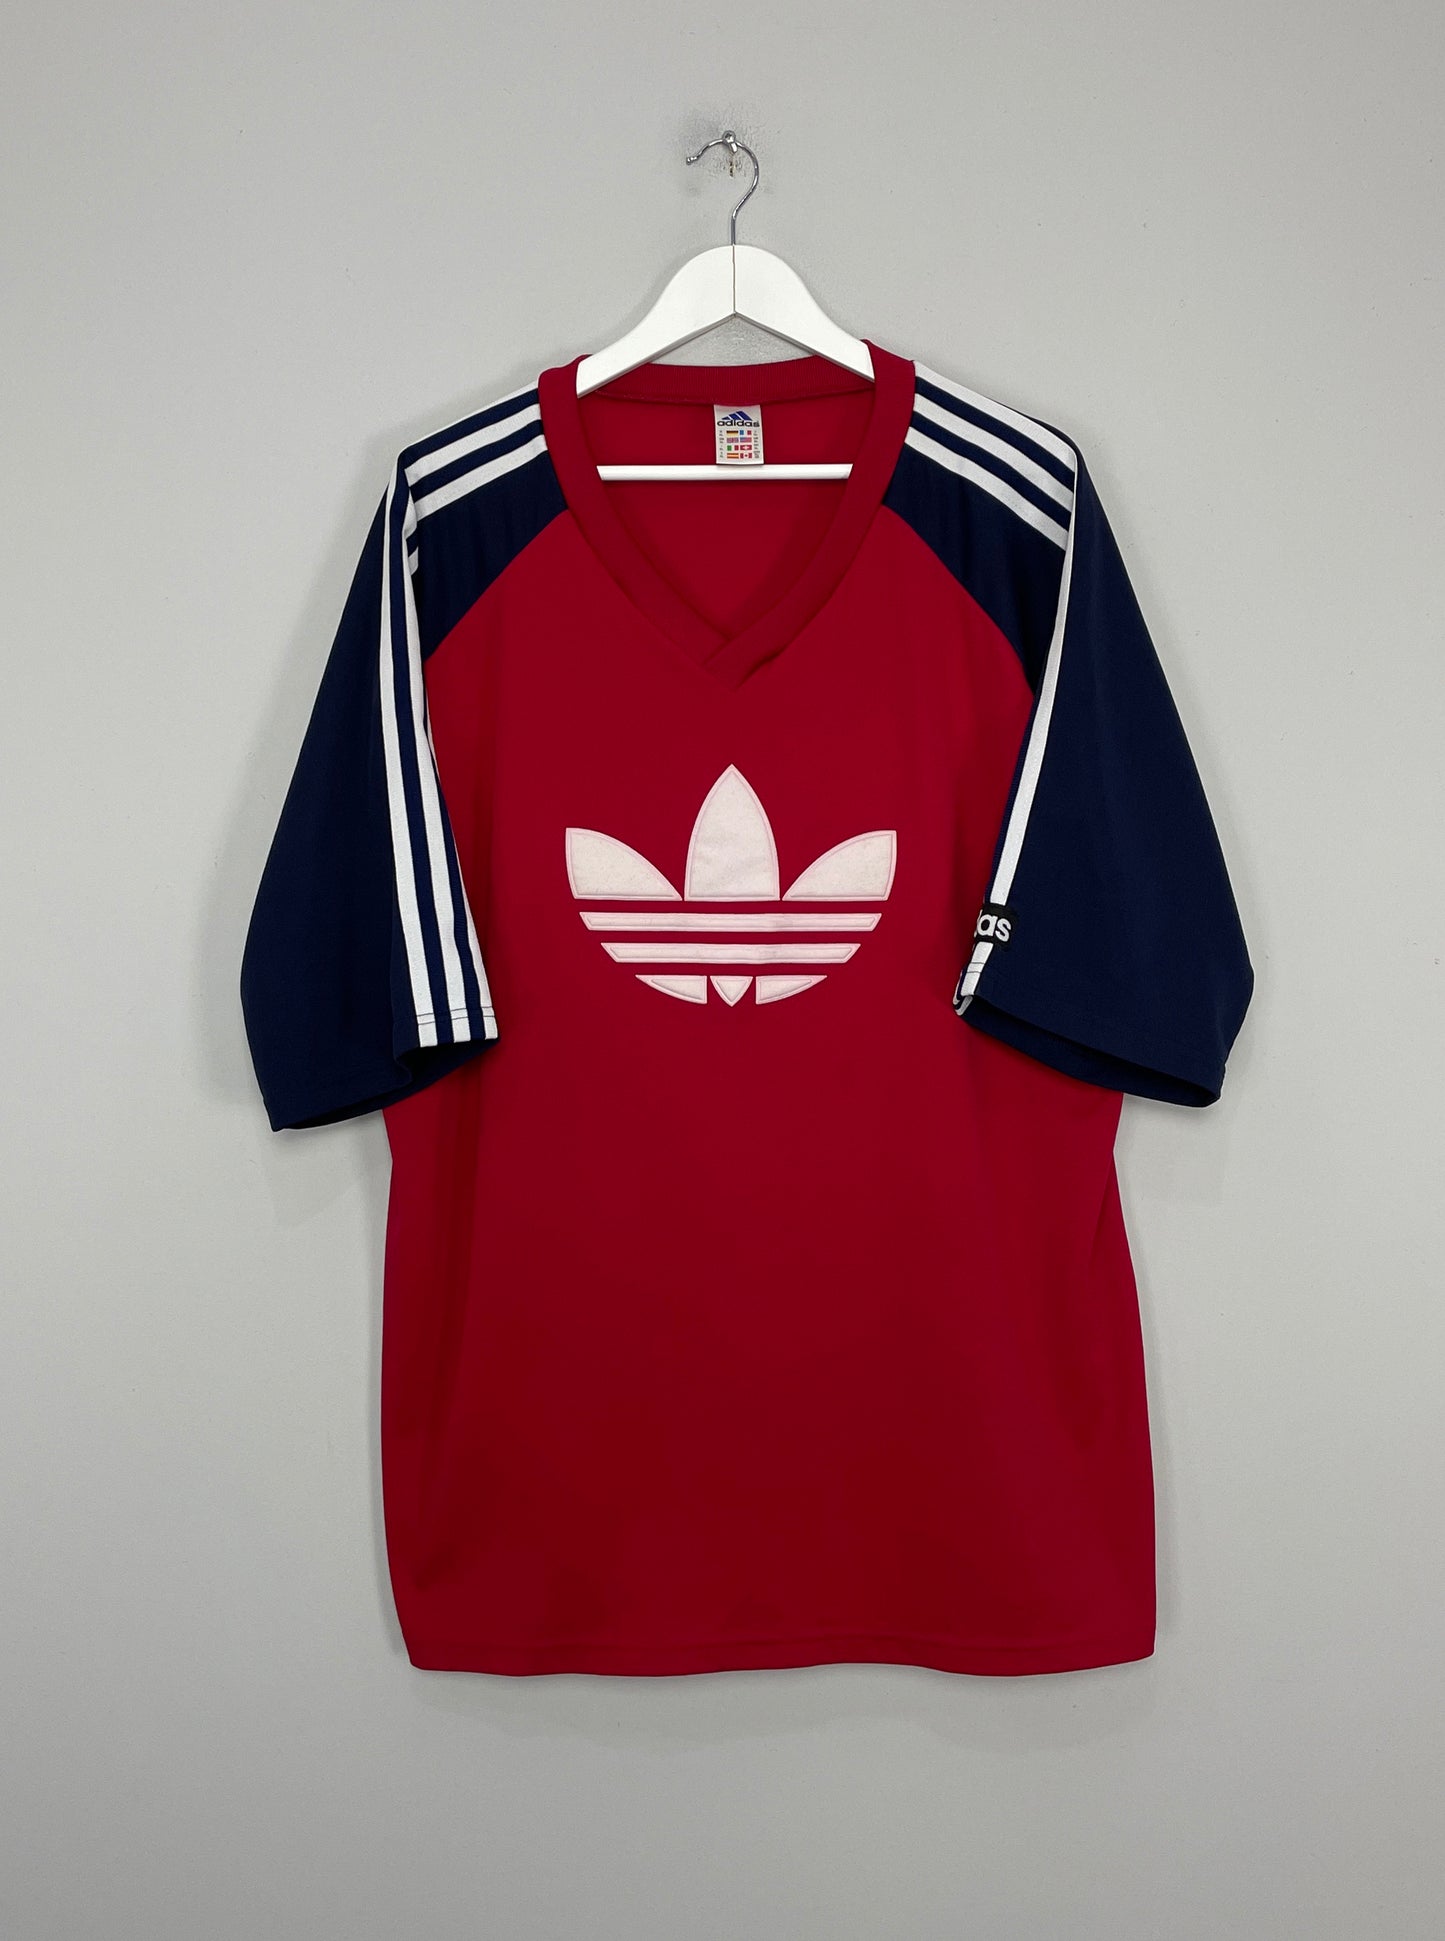 Image of the Adidas training shirt from the 2001/02 season